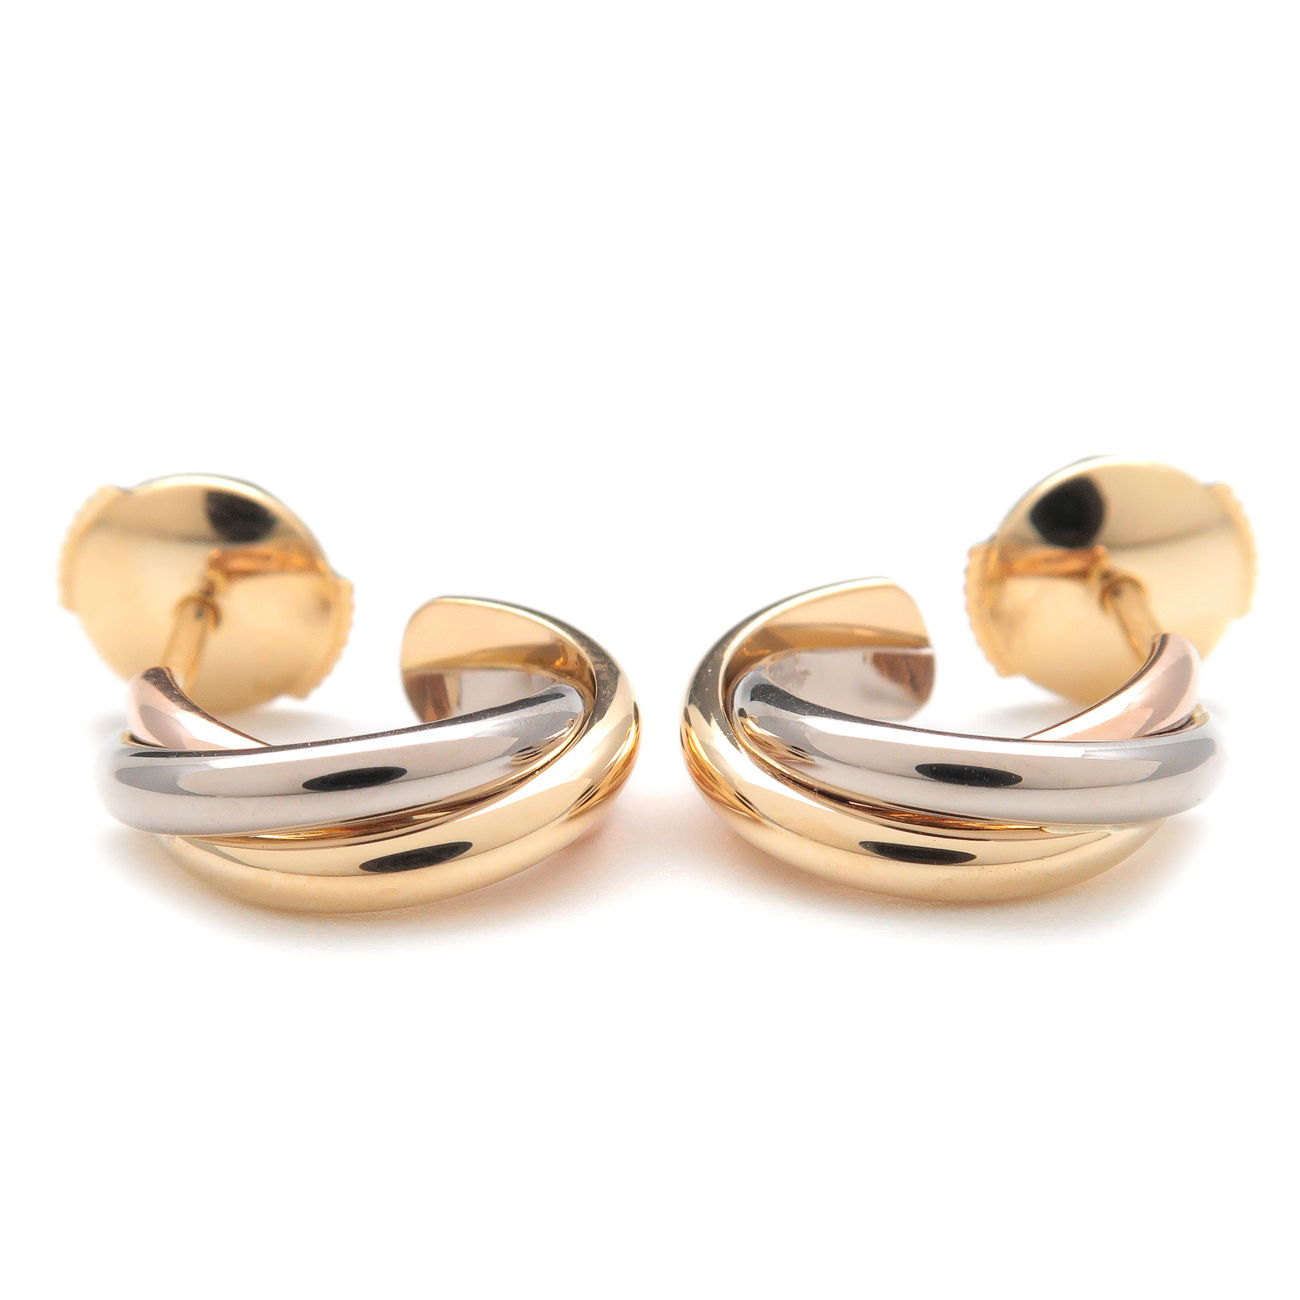 Cartier-Trinity-Earrings-K18-750-Yellow-Gold-White-Gold-Rose-Gold